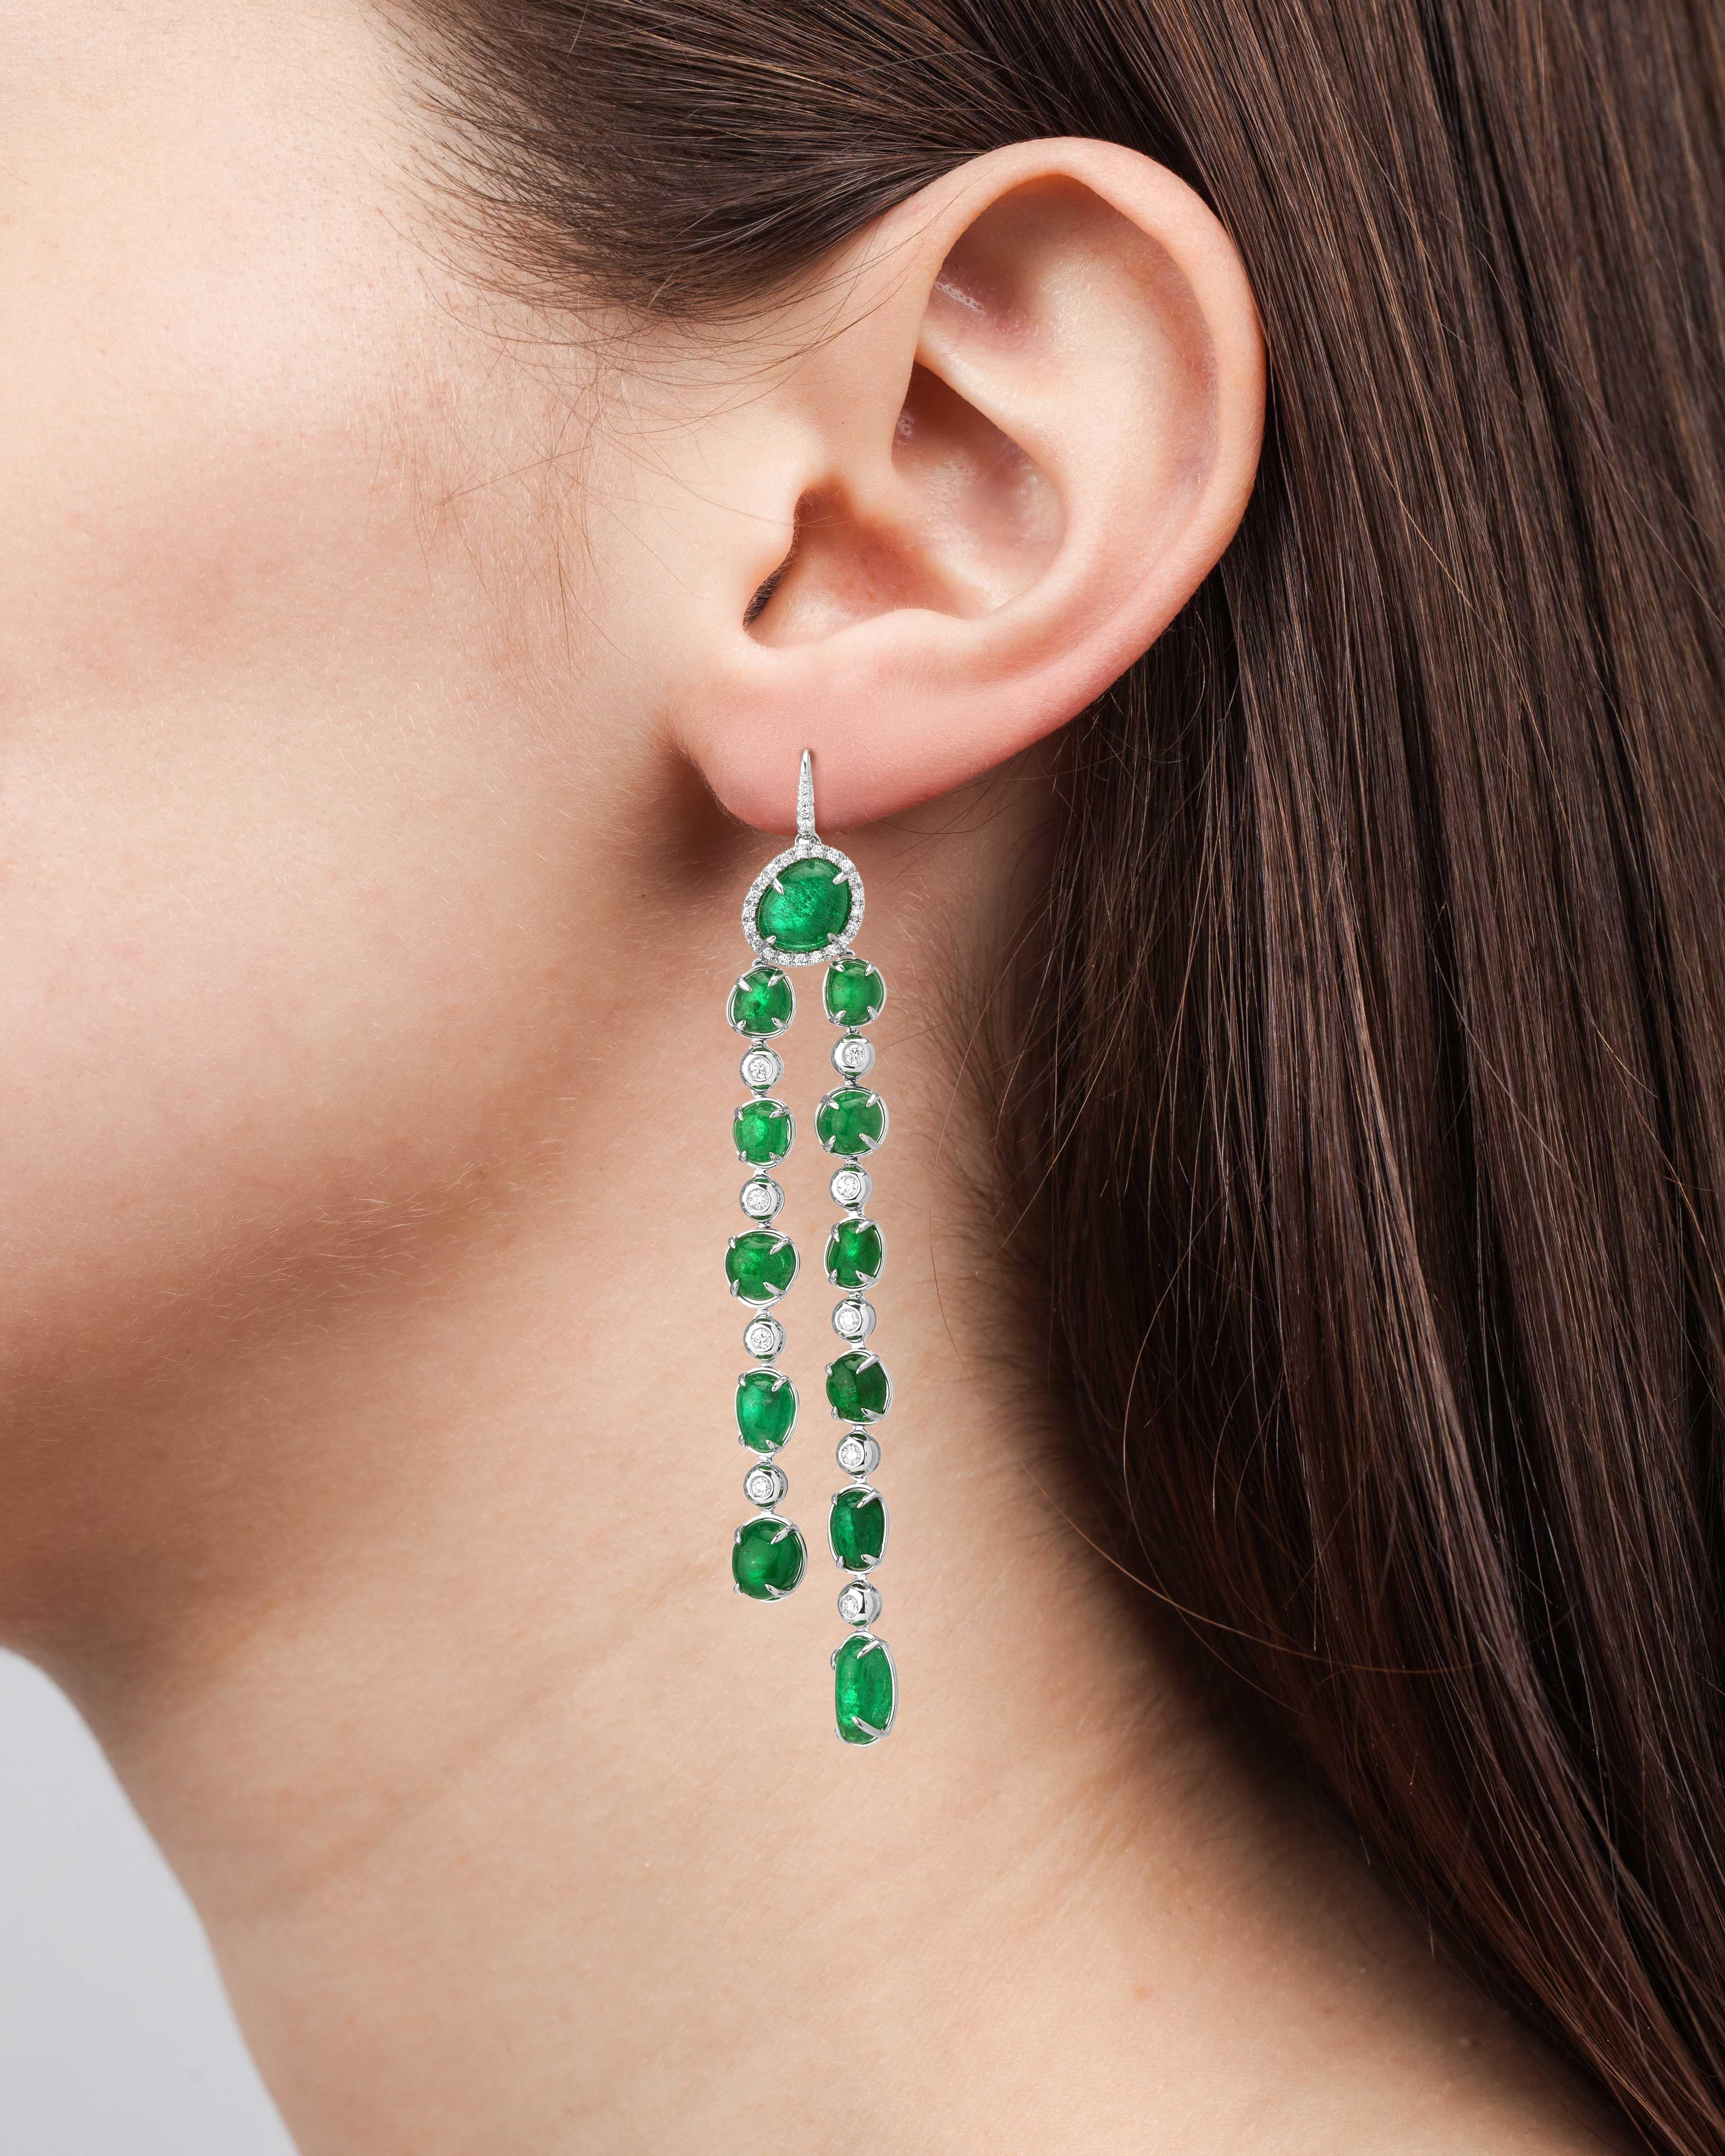 Contemporary long drop earrings set in 18 Karat white gold set with 52.31 carats of Muzo Colombian emeralds and 1.17 carats diamonds.

Muzo Emerald Colombia Heritage Muisca Earrings set with 52.31 carats Emerald

Named in honor of the ancient